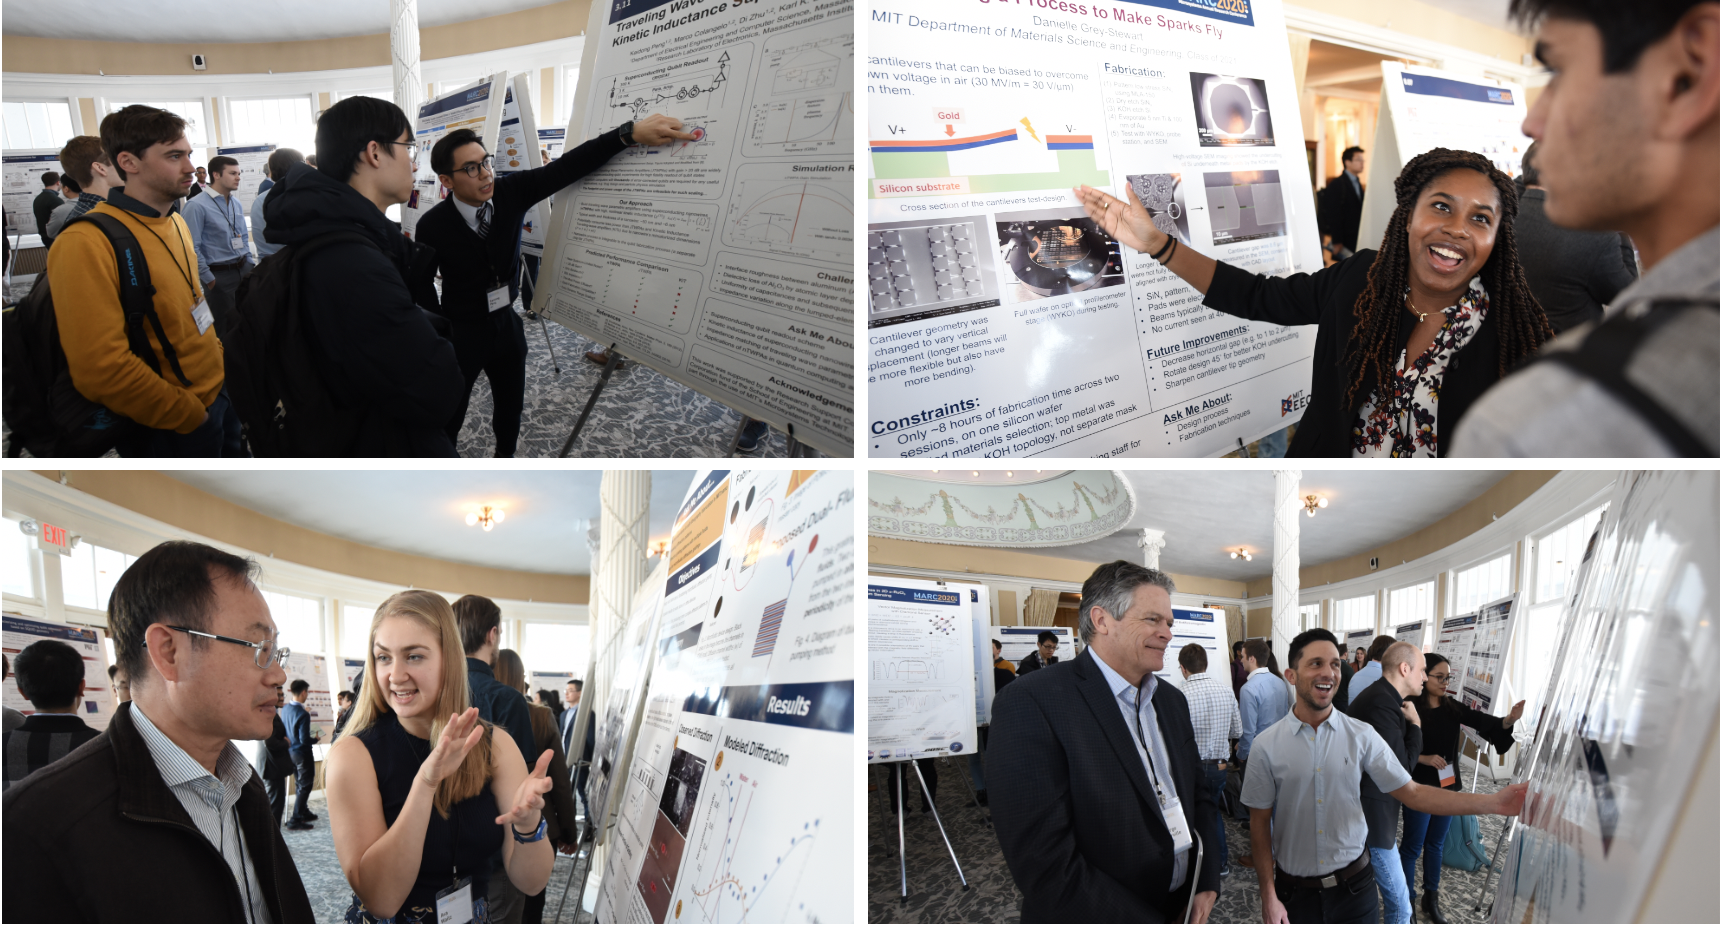 Students presenting at the poster session.